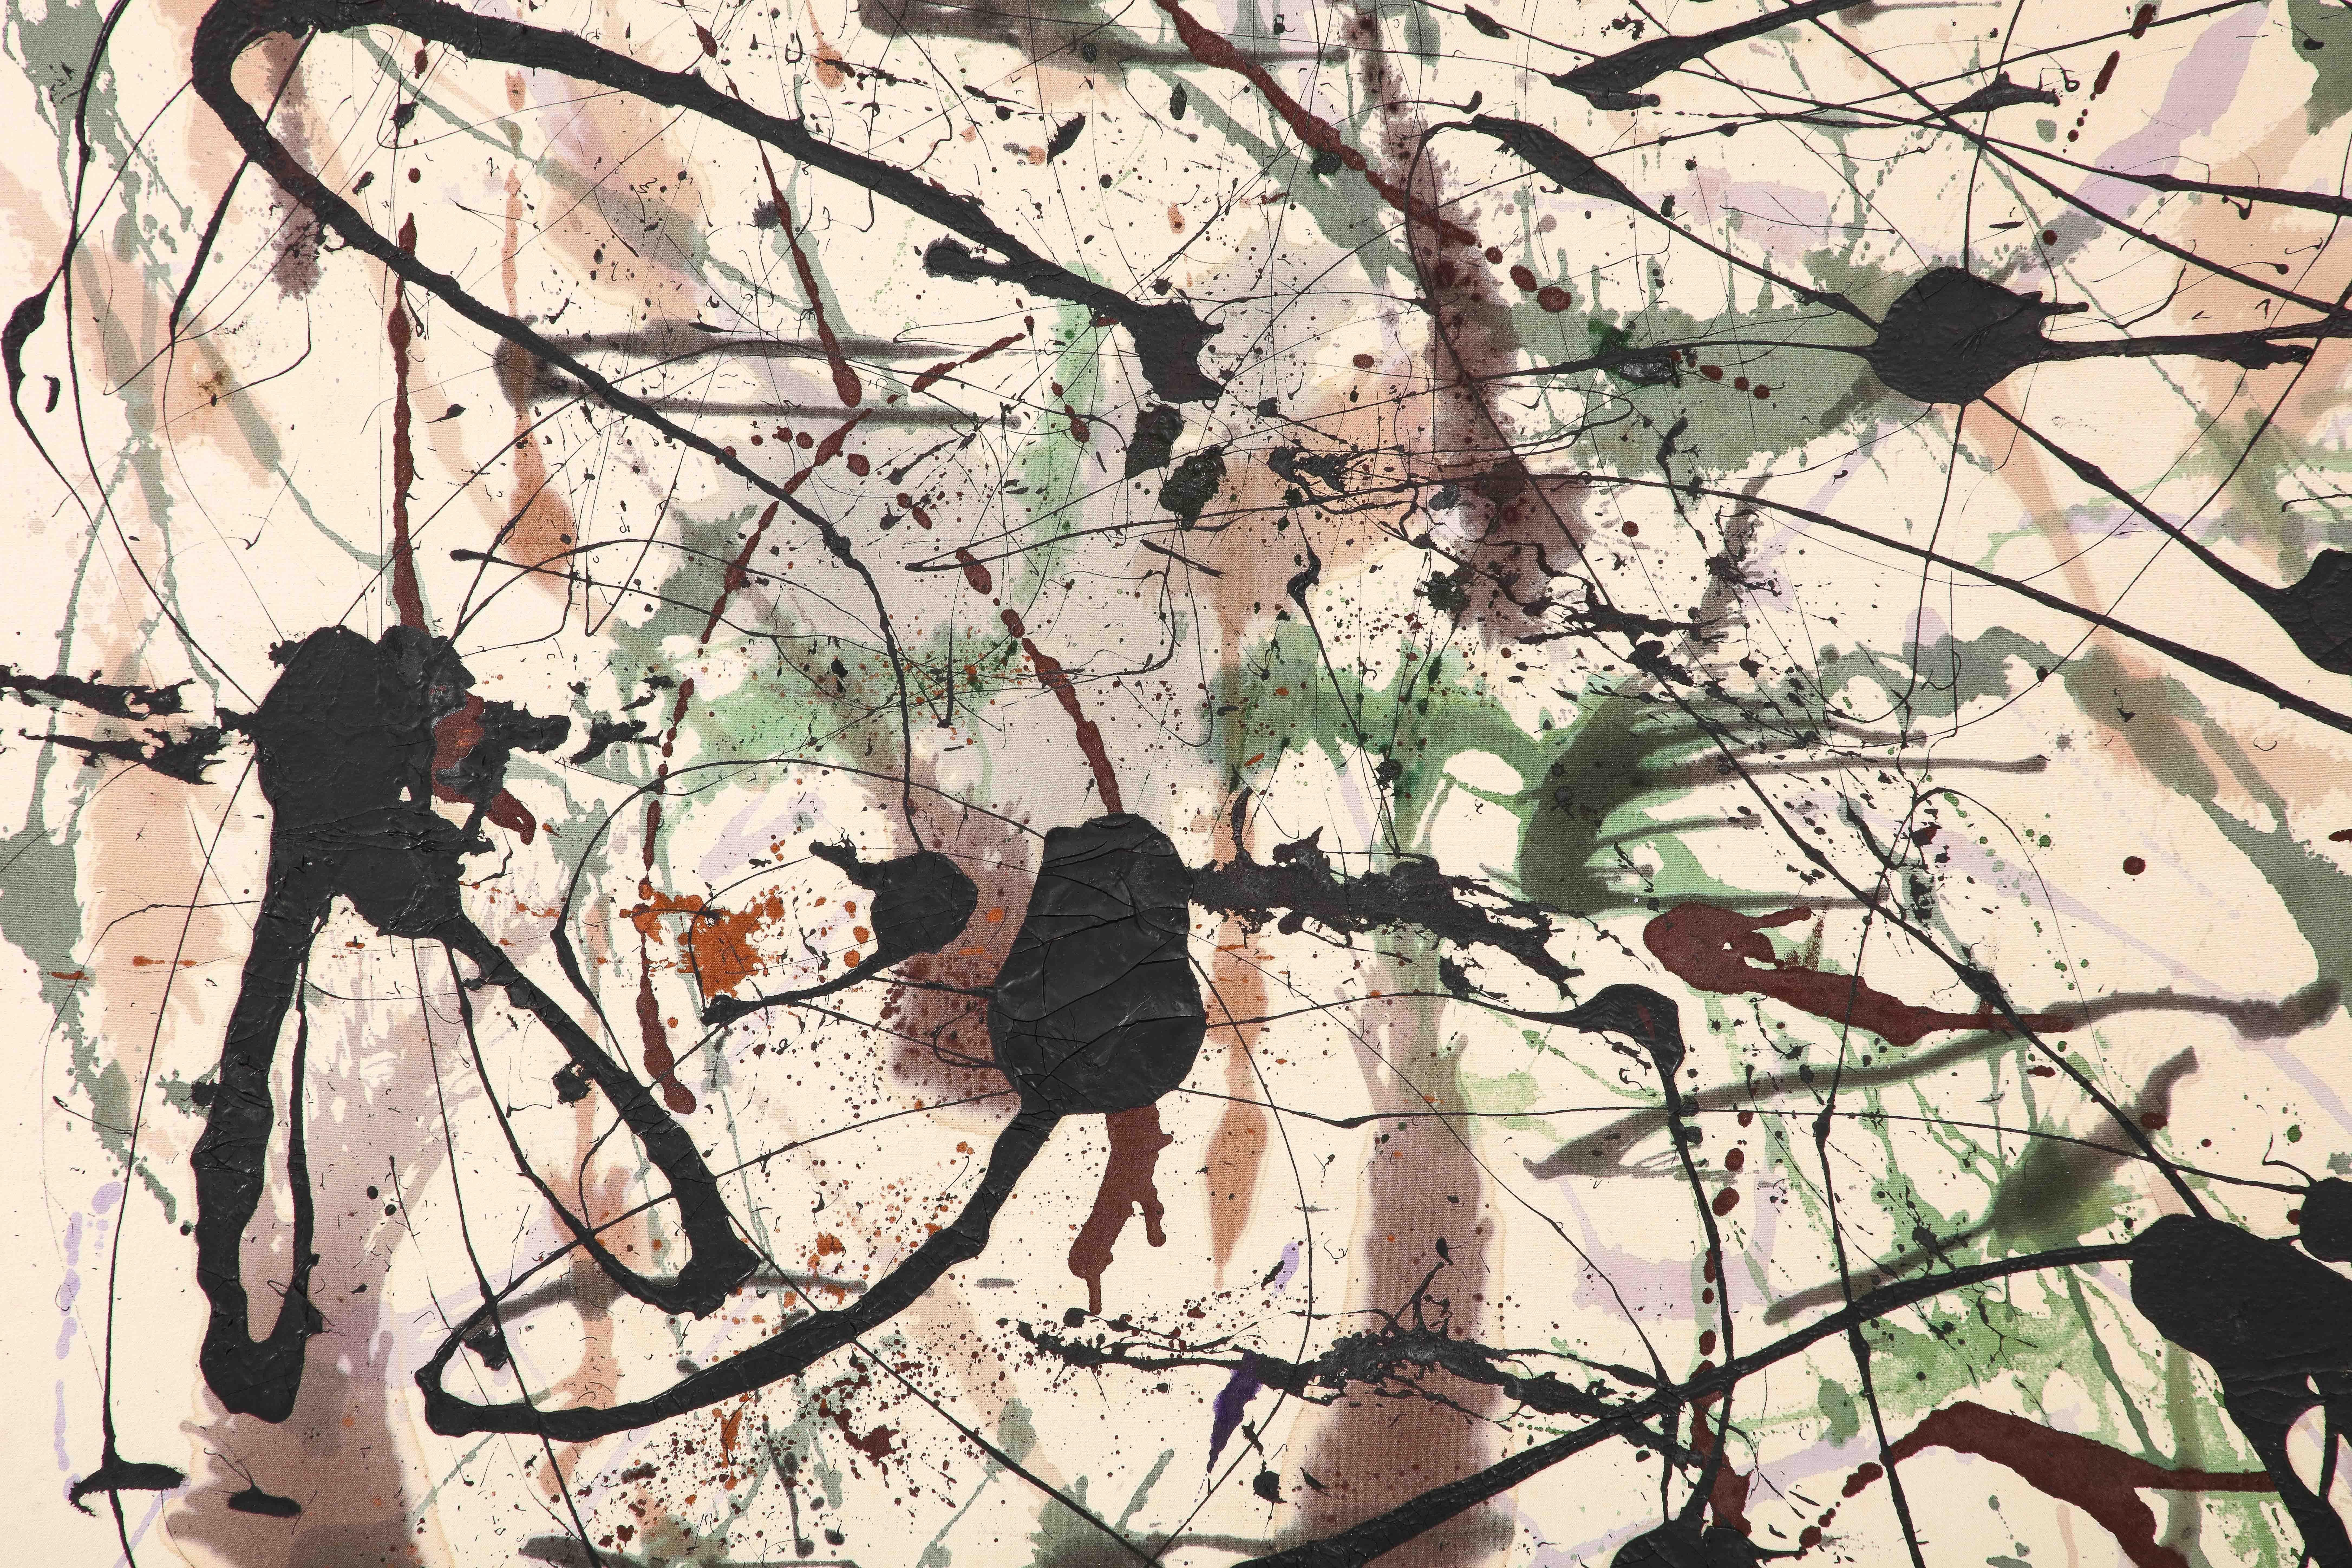 Late 20th Century Jackson Pollock Style Artwork By Woodstock, NY Artist For Sale